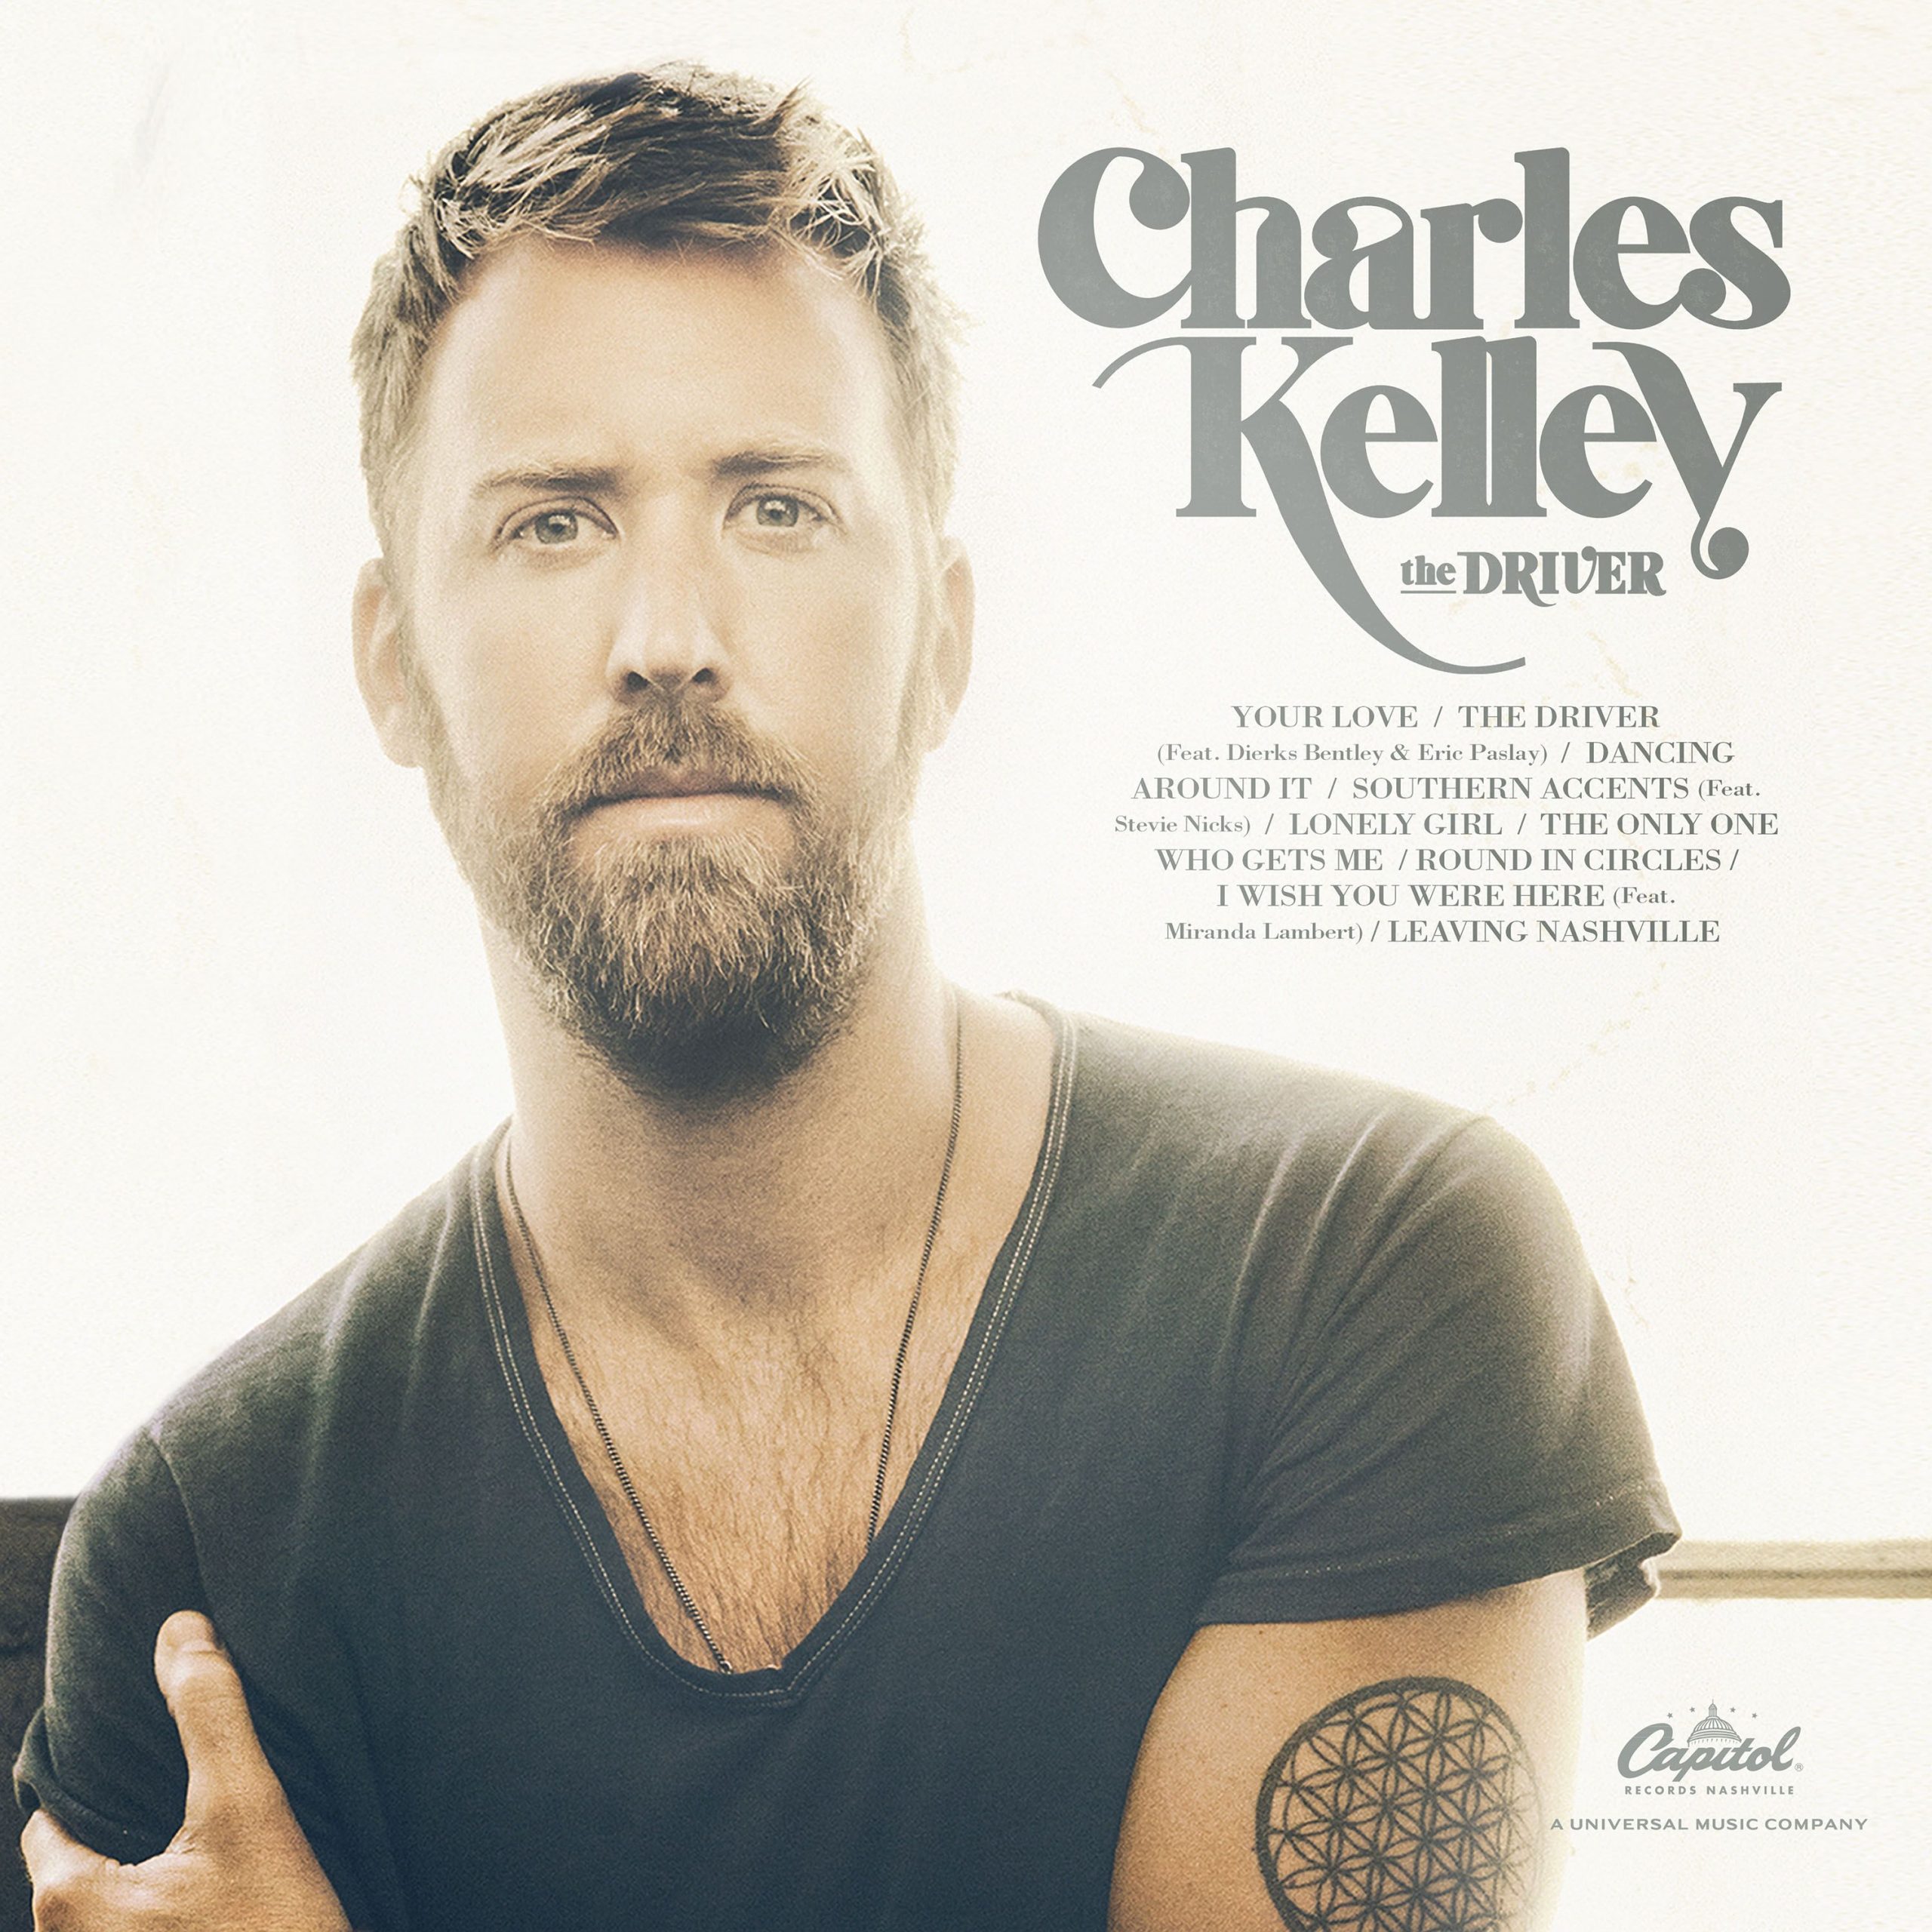 CHARLES KELLEY SETS RELEASE DATE FOR FIRST-EVER SOLO ALBUM, THE DRIVER